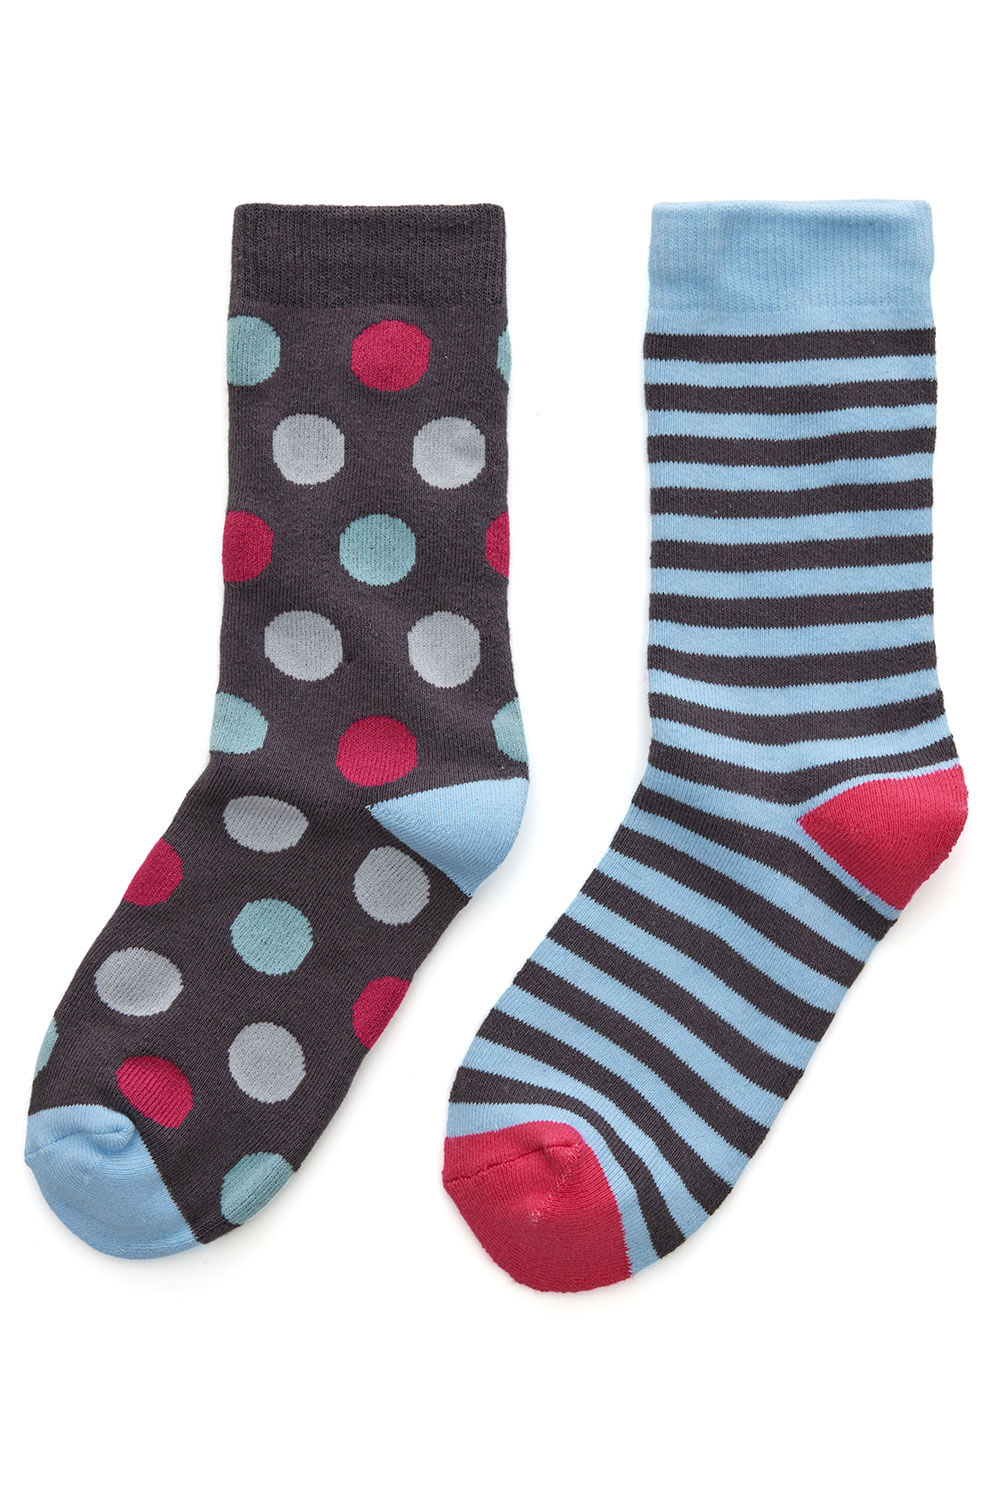 Bonmarche Blue 2 Pack Spot and Striped Thermal Socks, Size: One Size